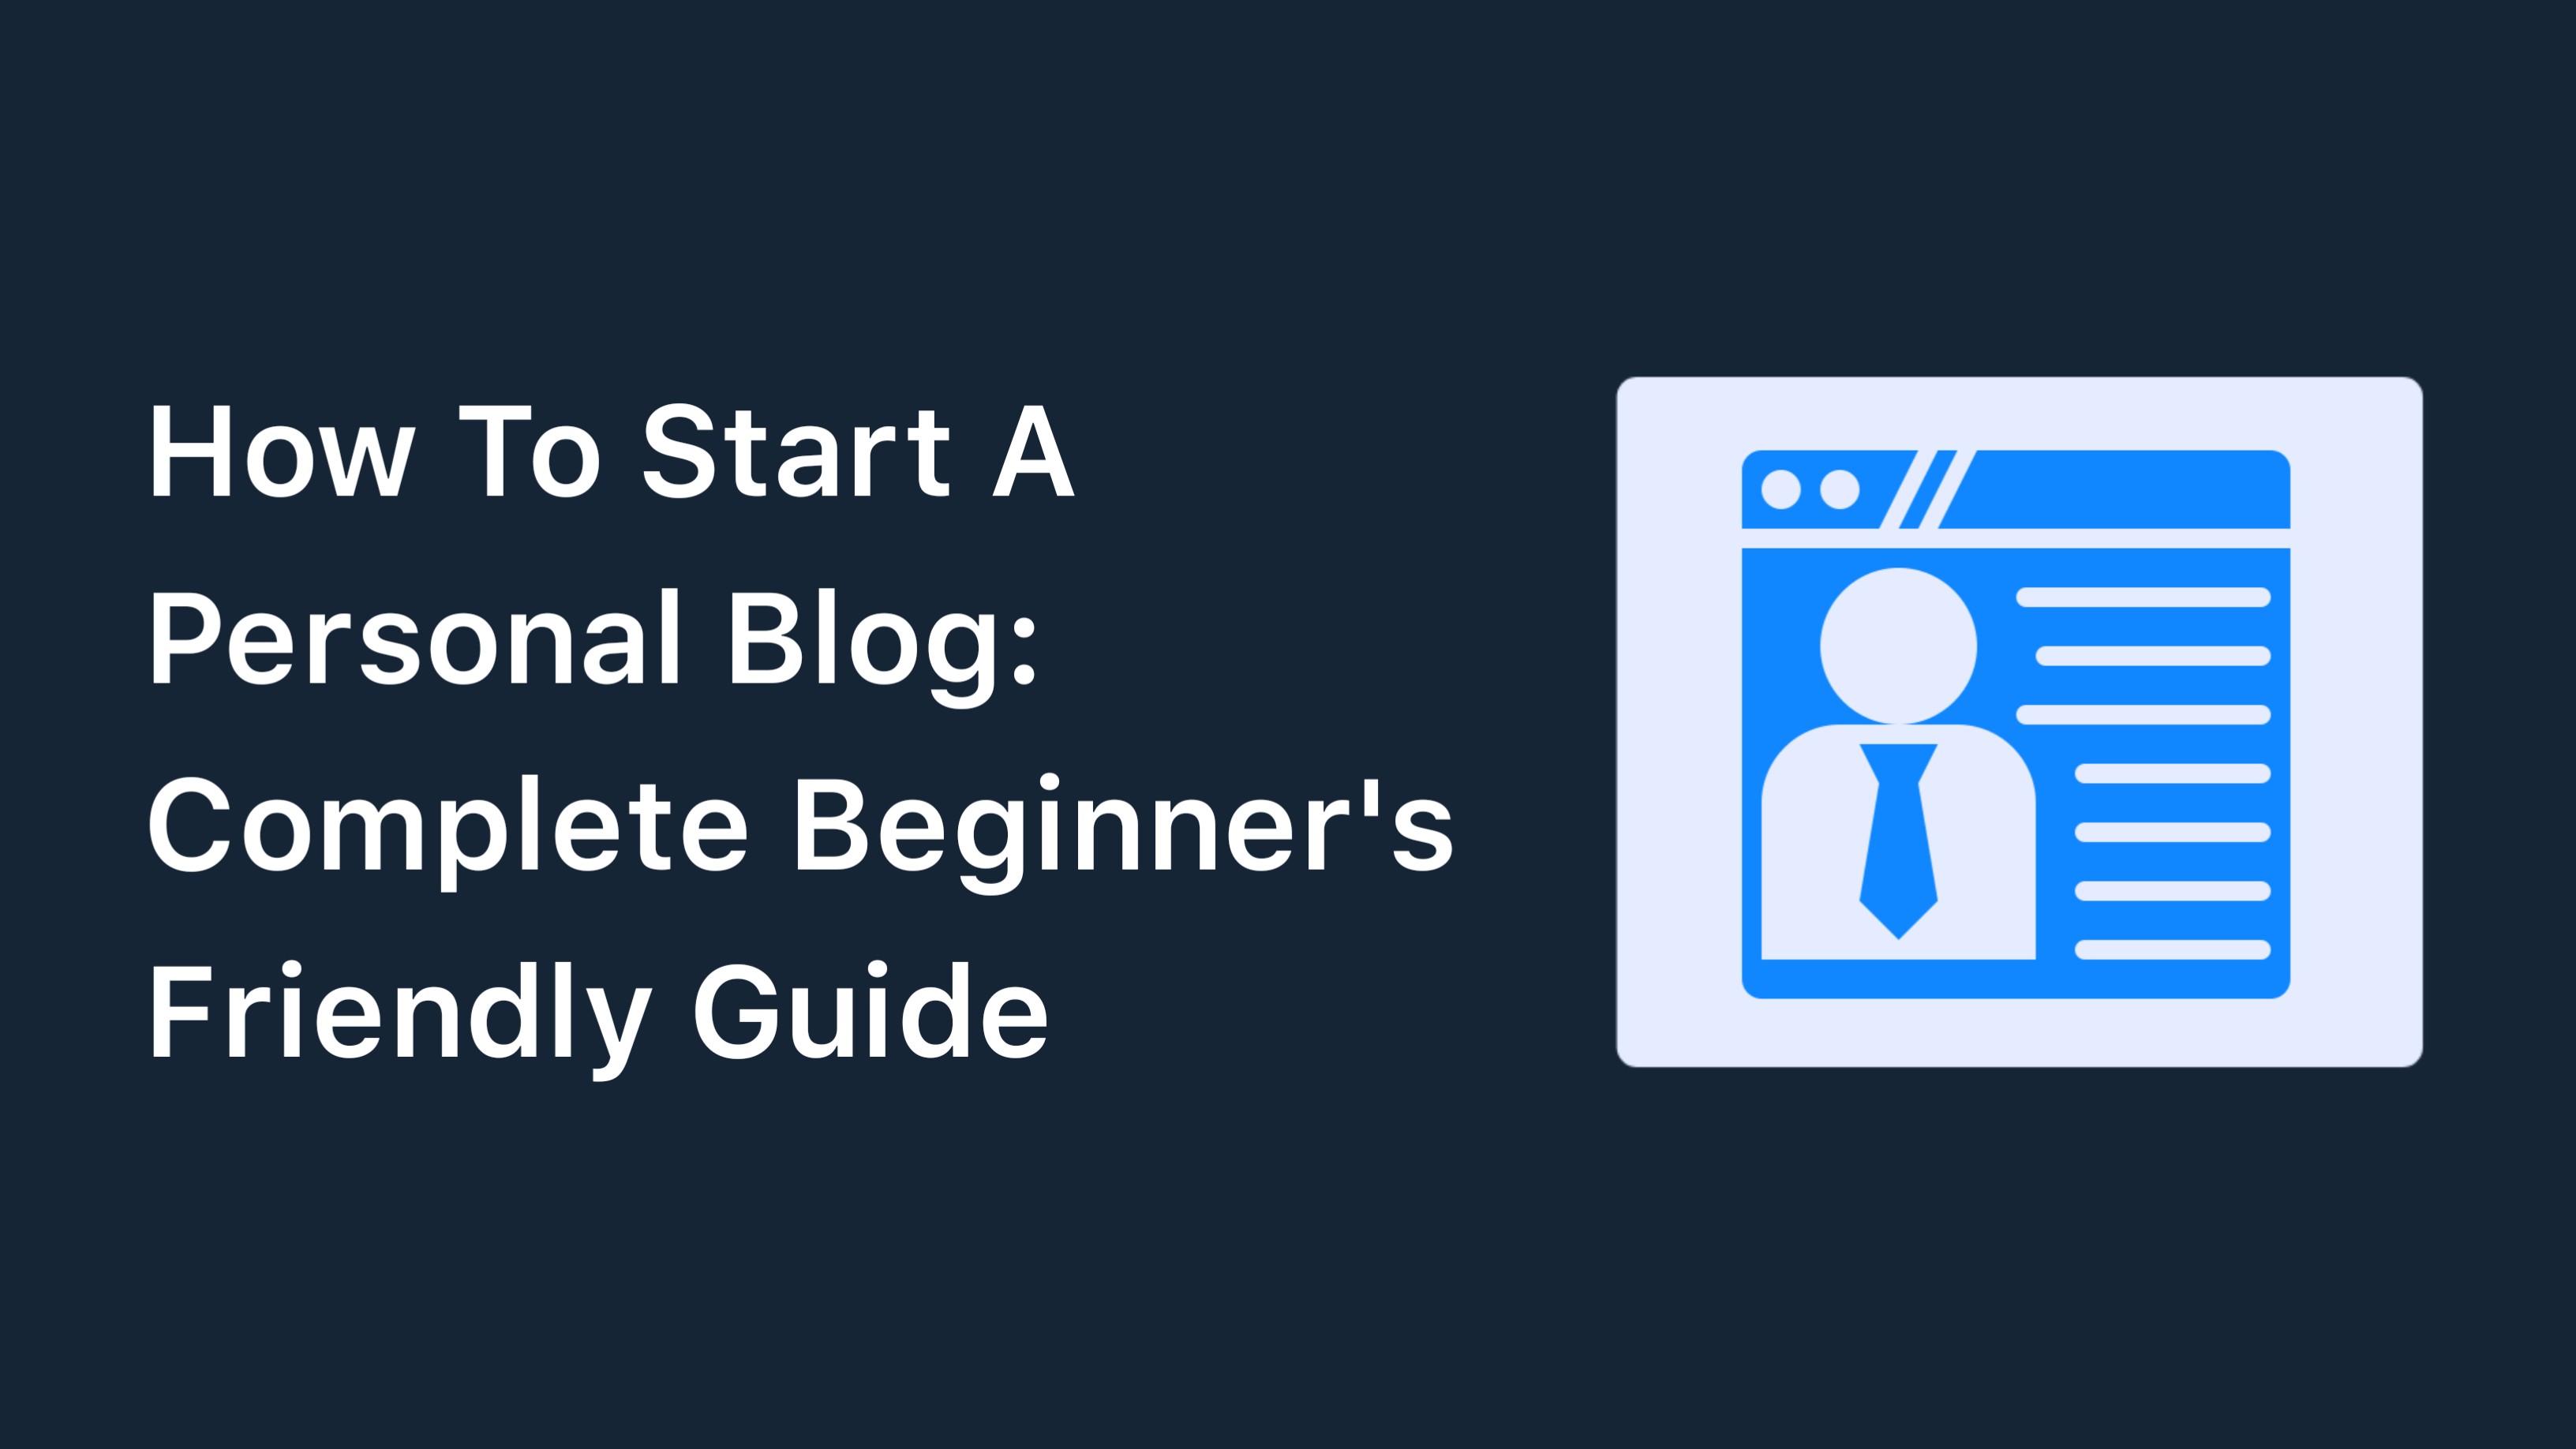 How To Start A Personal Blog